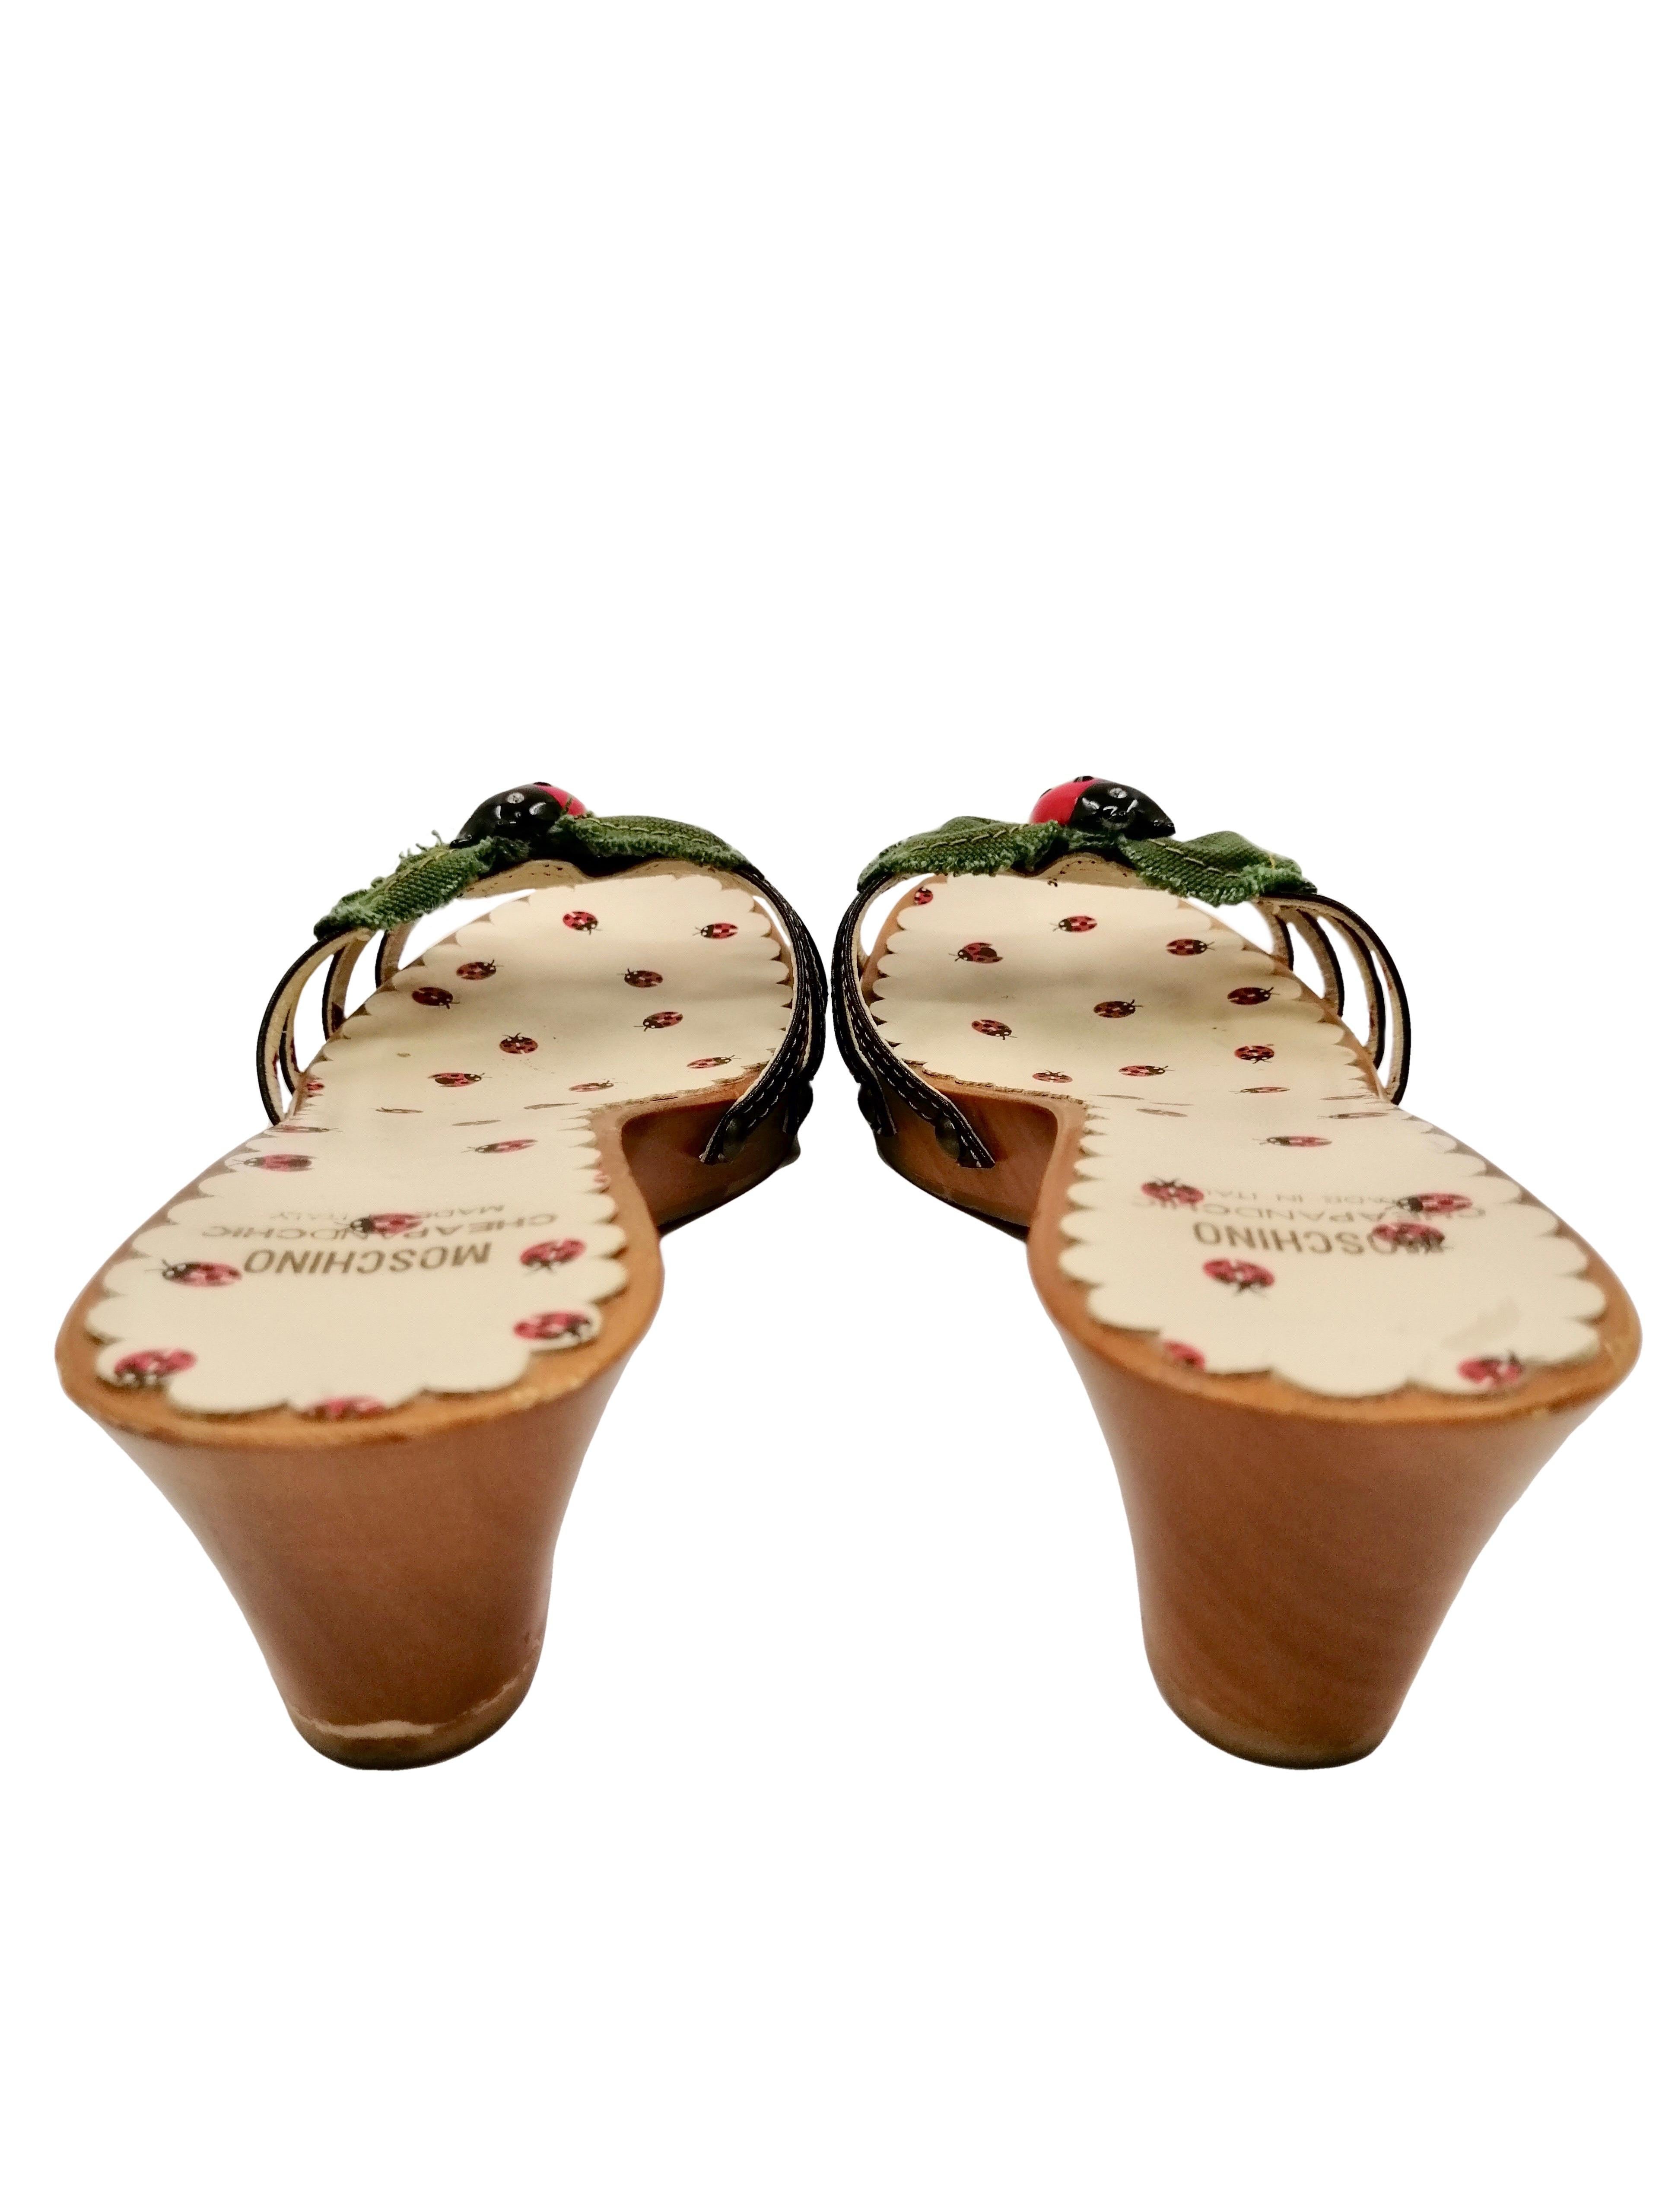 MOSCHINO lady bugs clogs For Sale 4